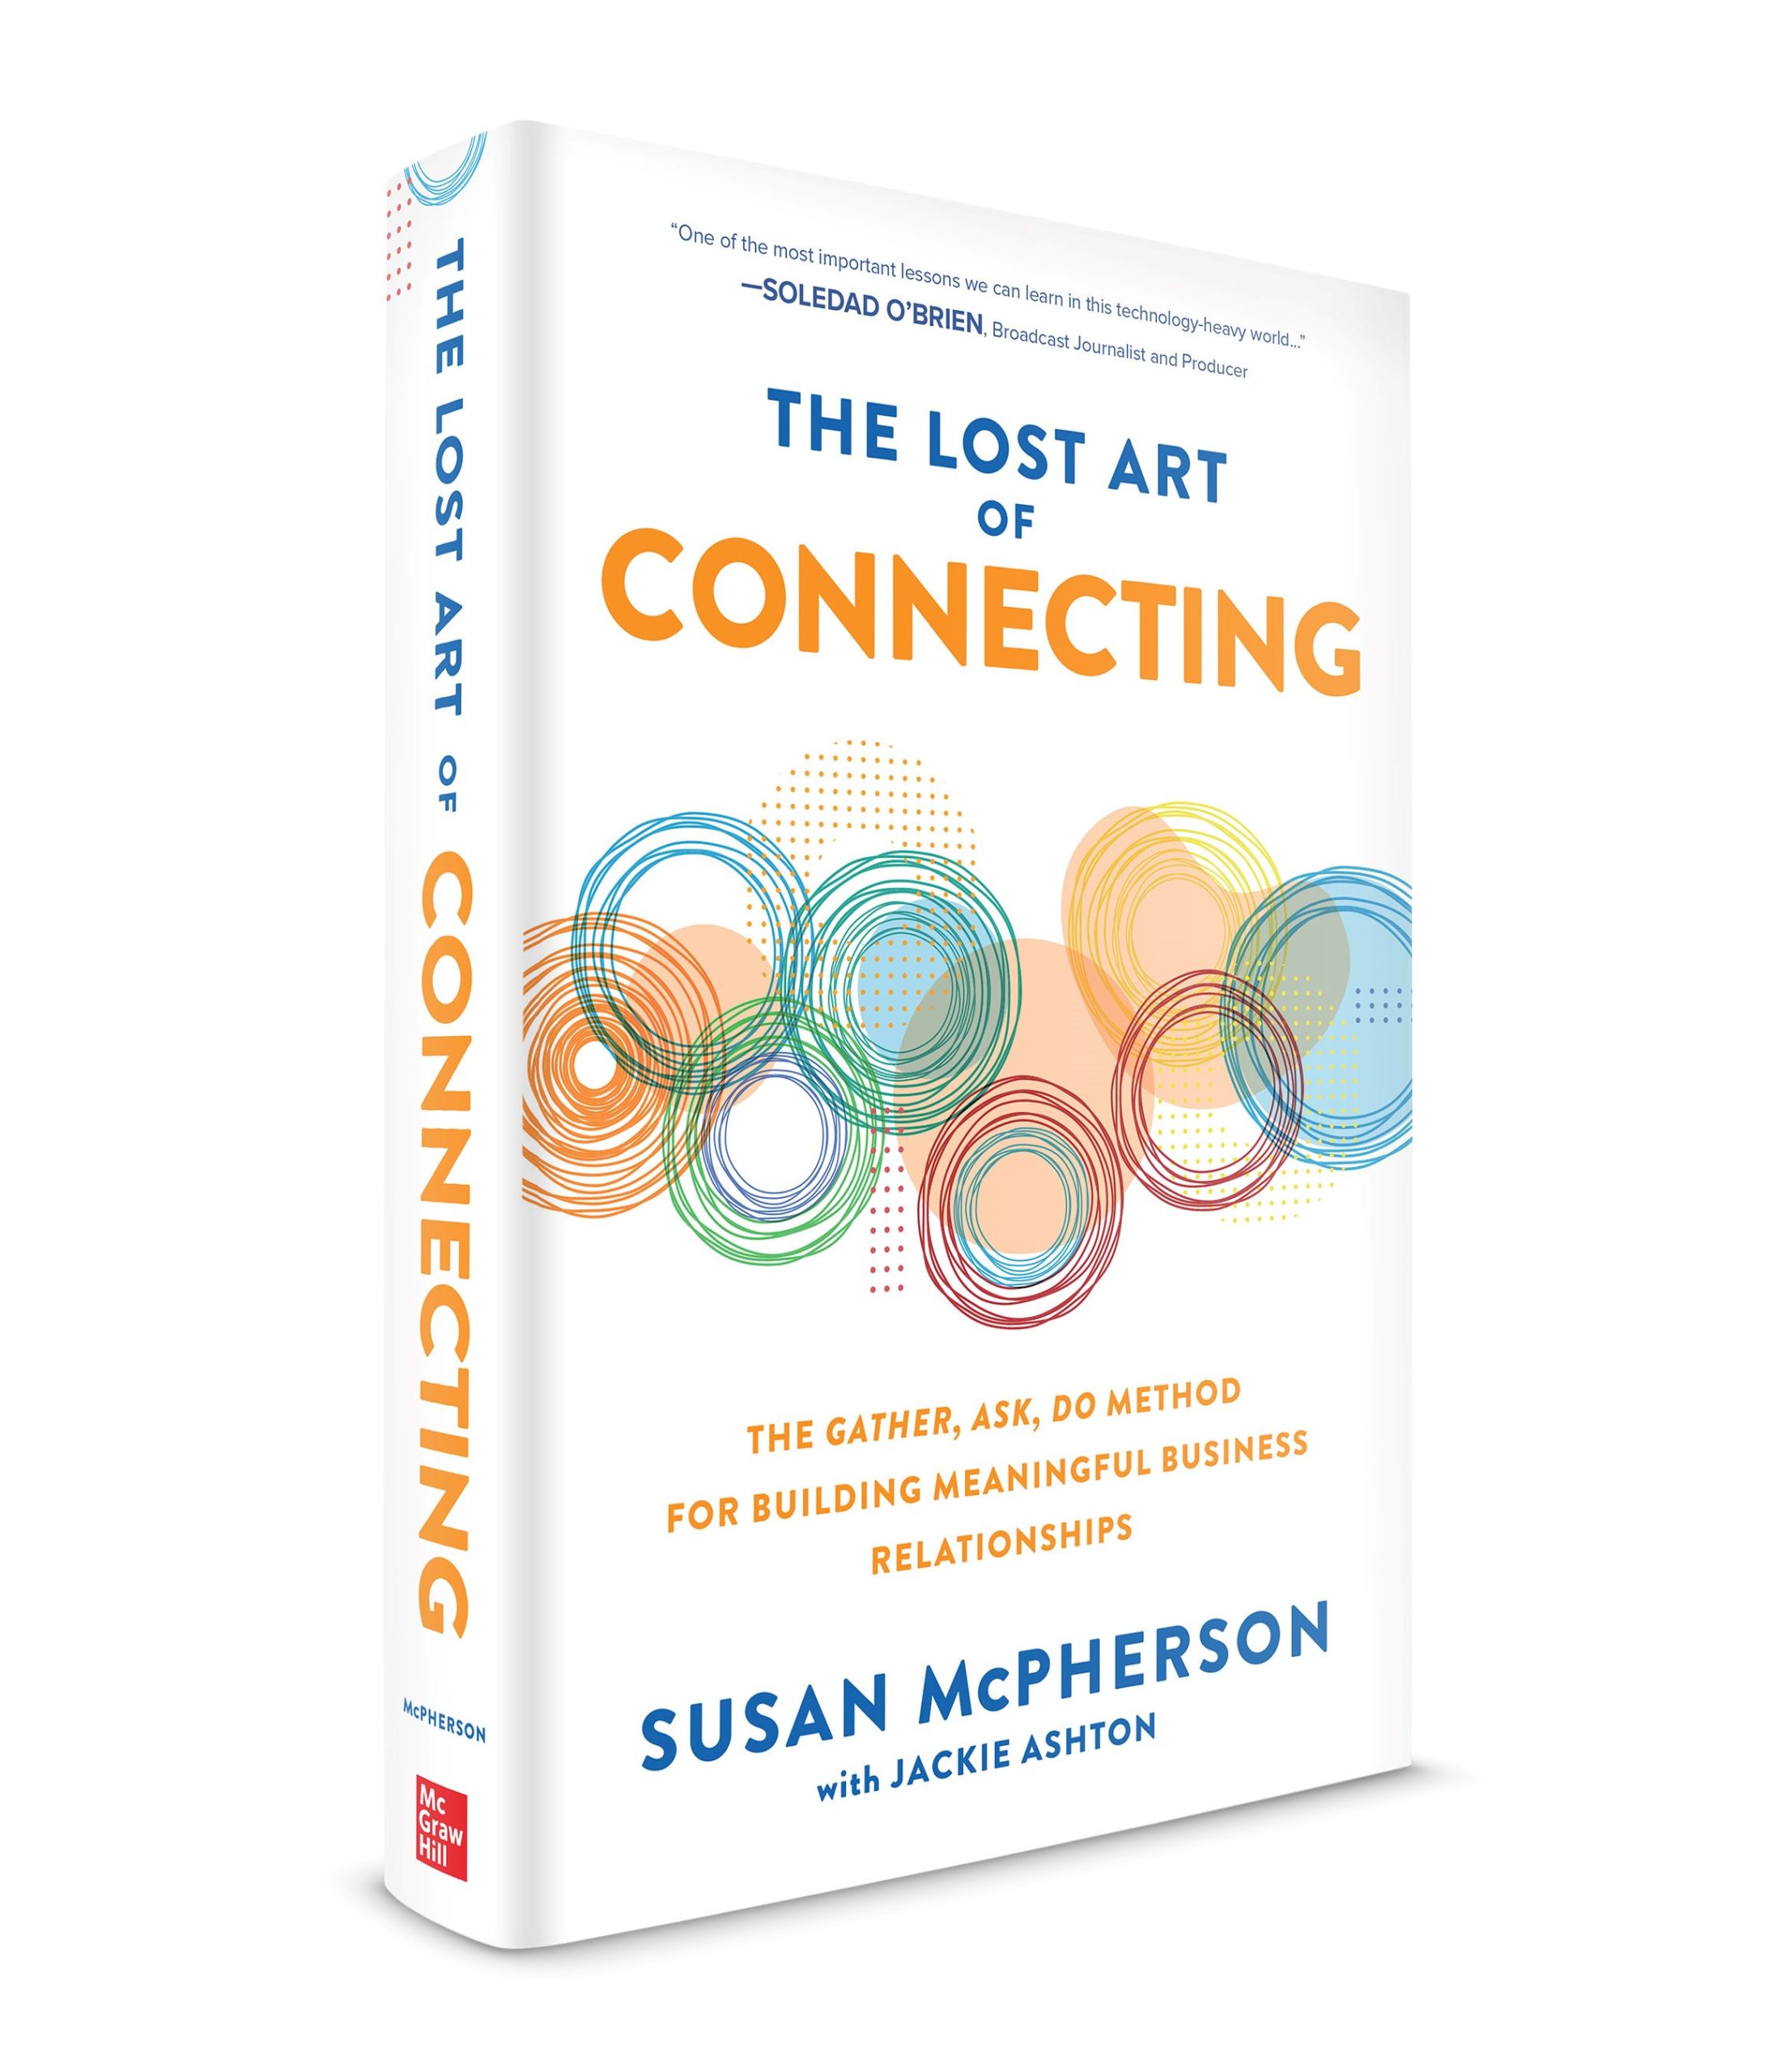 The Lost Art of Connecting (McPherson)